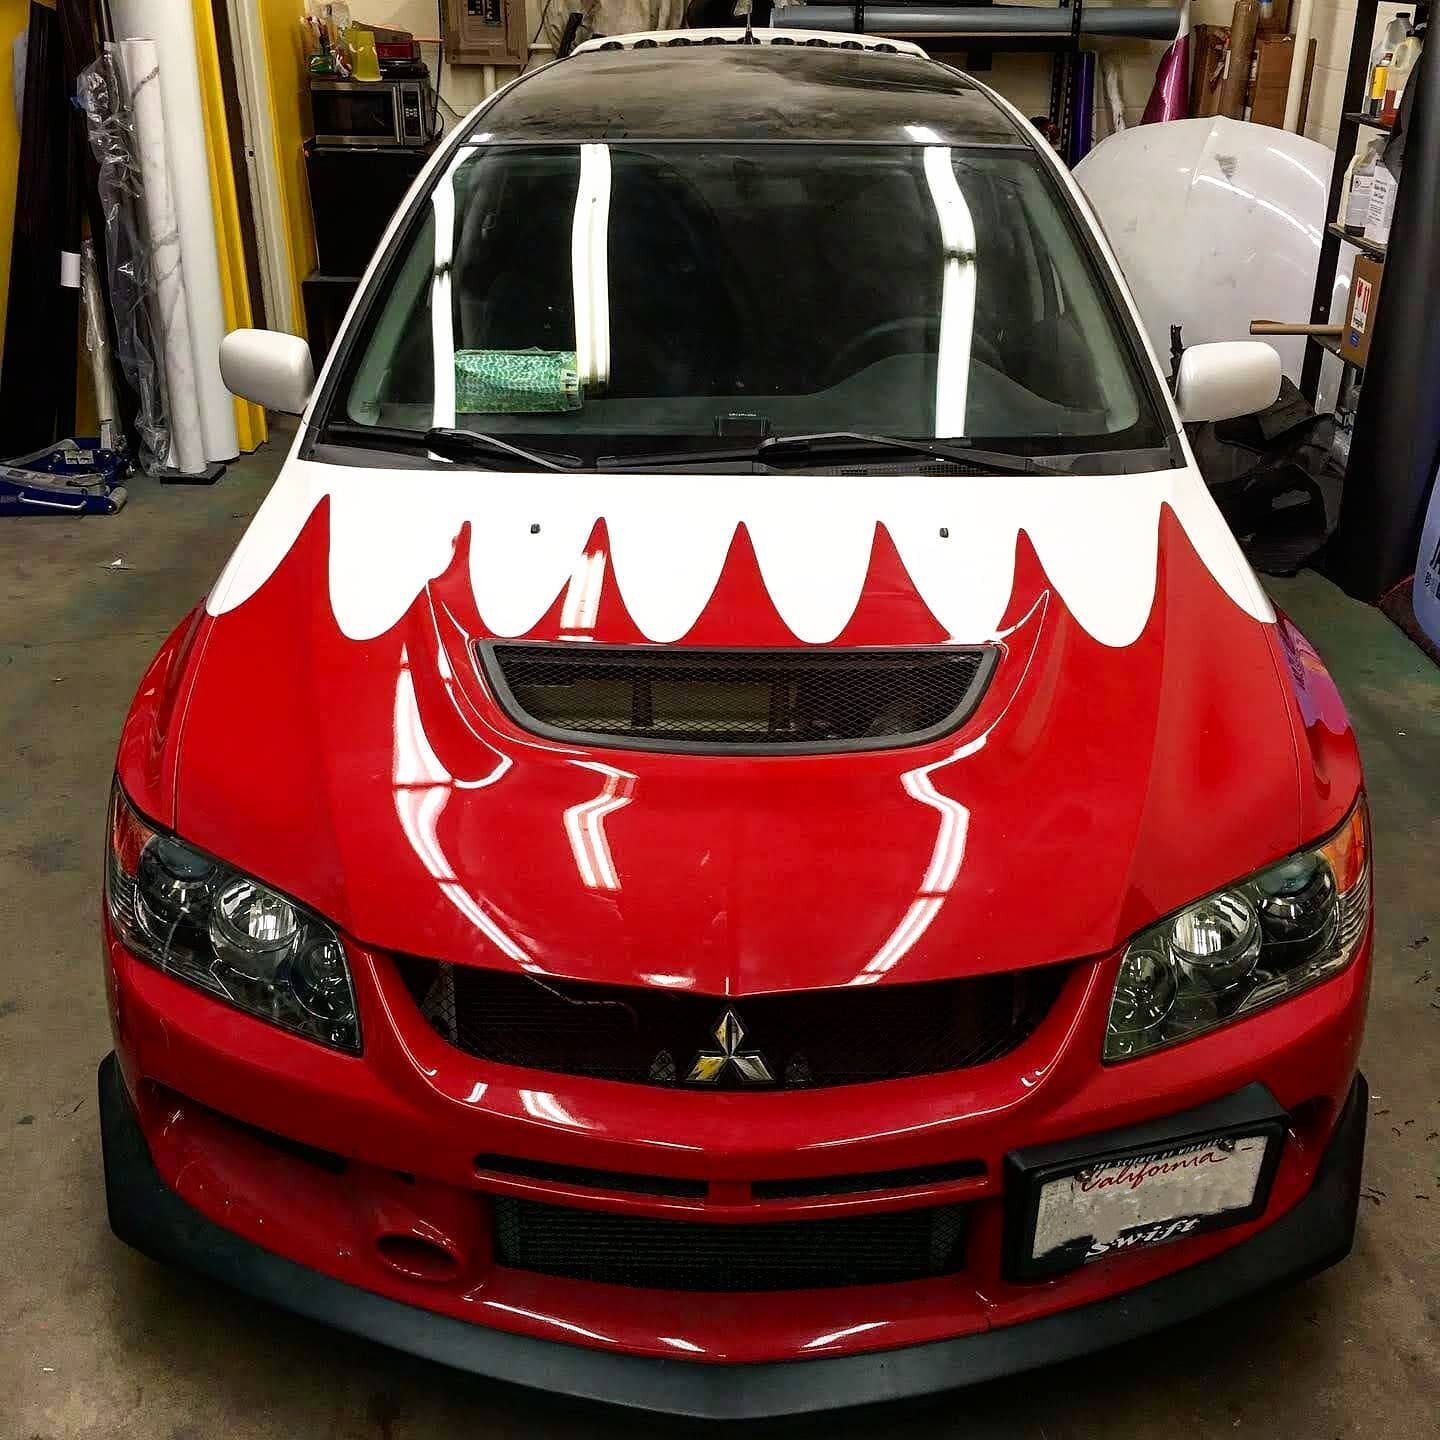 Mitsubishi Evo Front End Conversion and Cyber Evo Livery
🔹🔹🔹🔹🔹🔹🔹🔹🔹🔹🔹🔹🔹🔹🔹🔹🔹🔹🔹🔹
#cars #carlifestyle #carlife #instacars #carsofinstagram #carswithoutlimits #carstagram #carporn #mitsubishi #mitsubishilancer #mitsubishievo #mitsubish